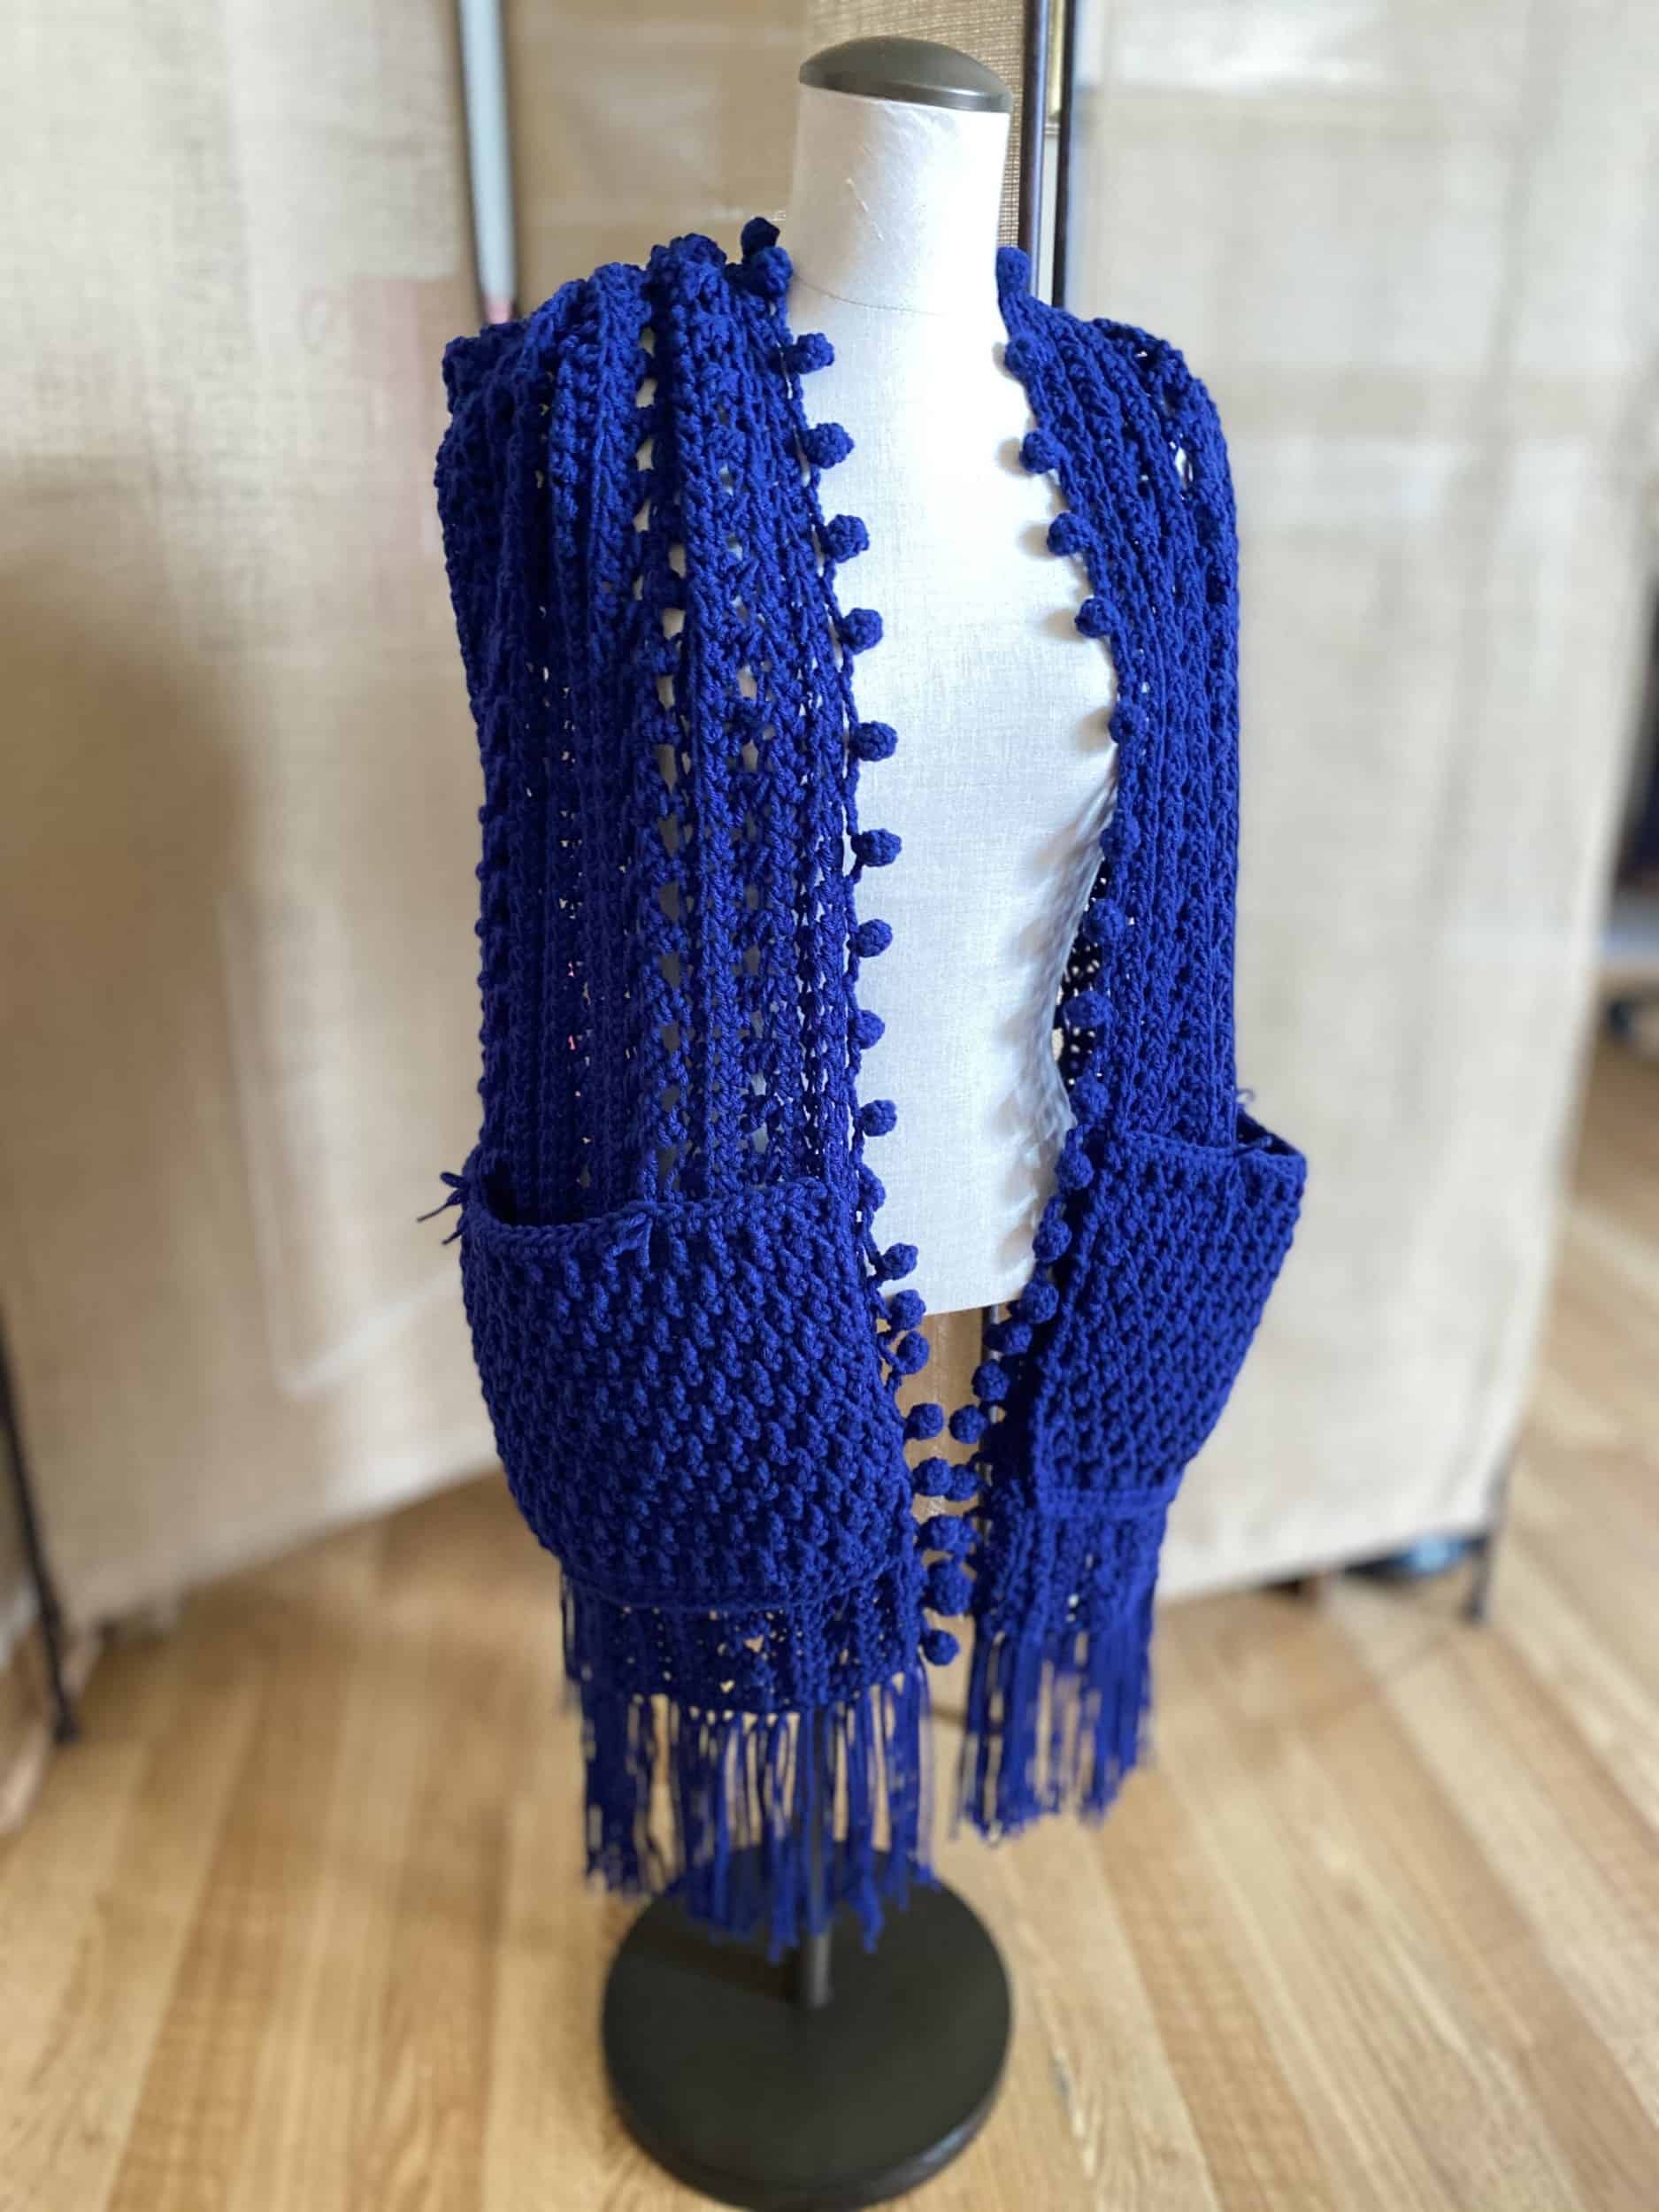 This Crochet Pocket Shawl Scarf is made with love by Classy Crafty Wife! Shop more unique gift ideas today with Spots Initiatives, the best way to support creators.